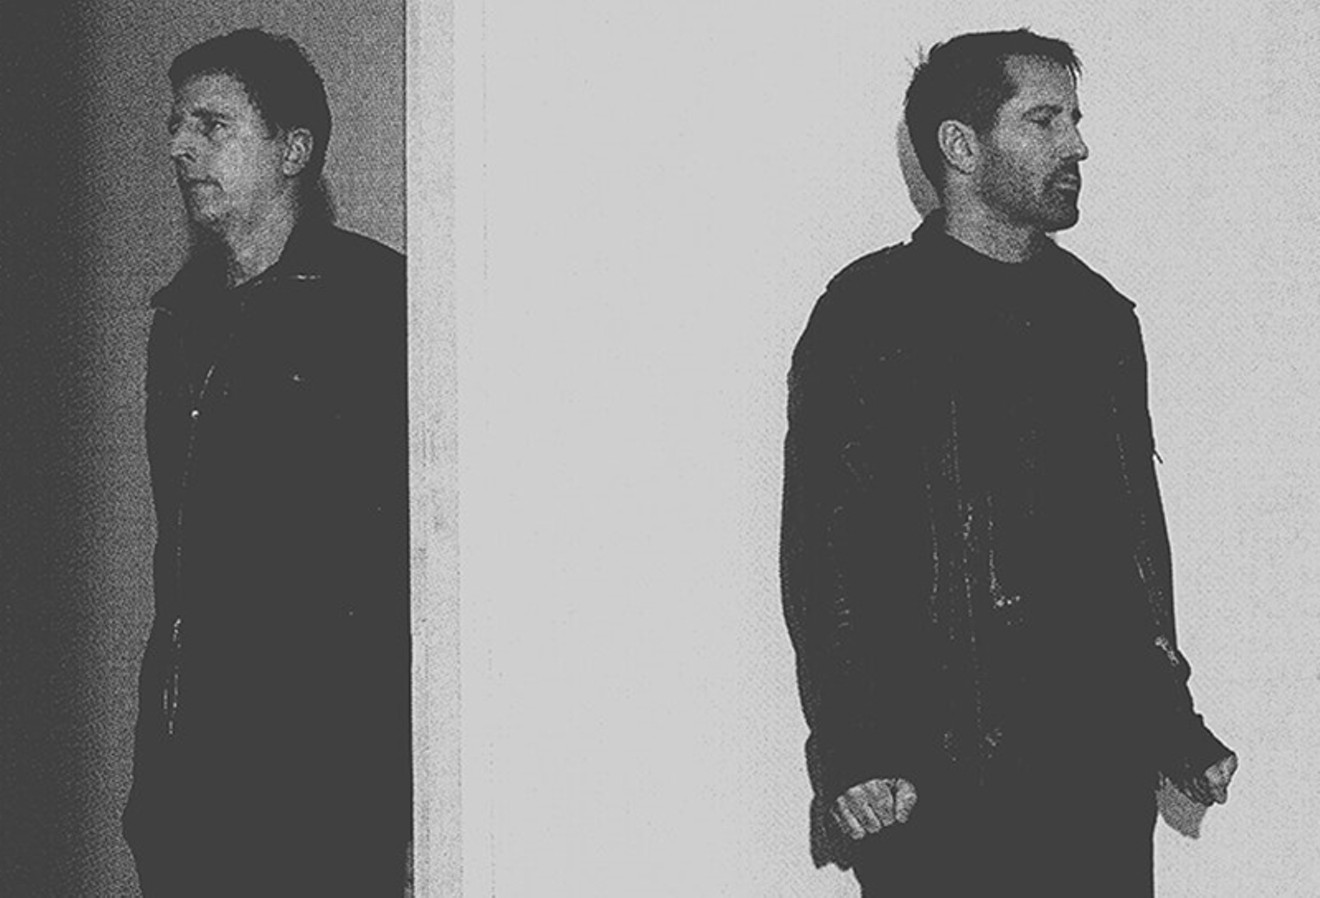 Atticus Ross (left) and Trent Reznor (right) of Nine Inch Nails.